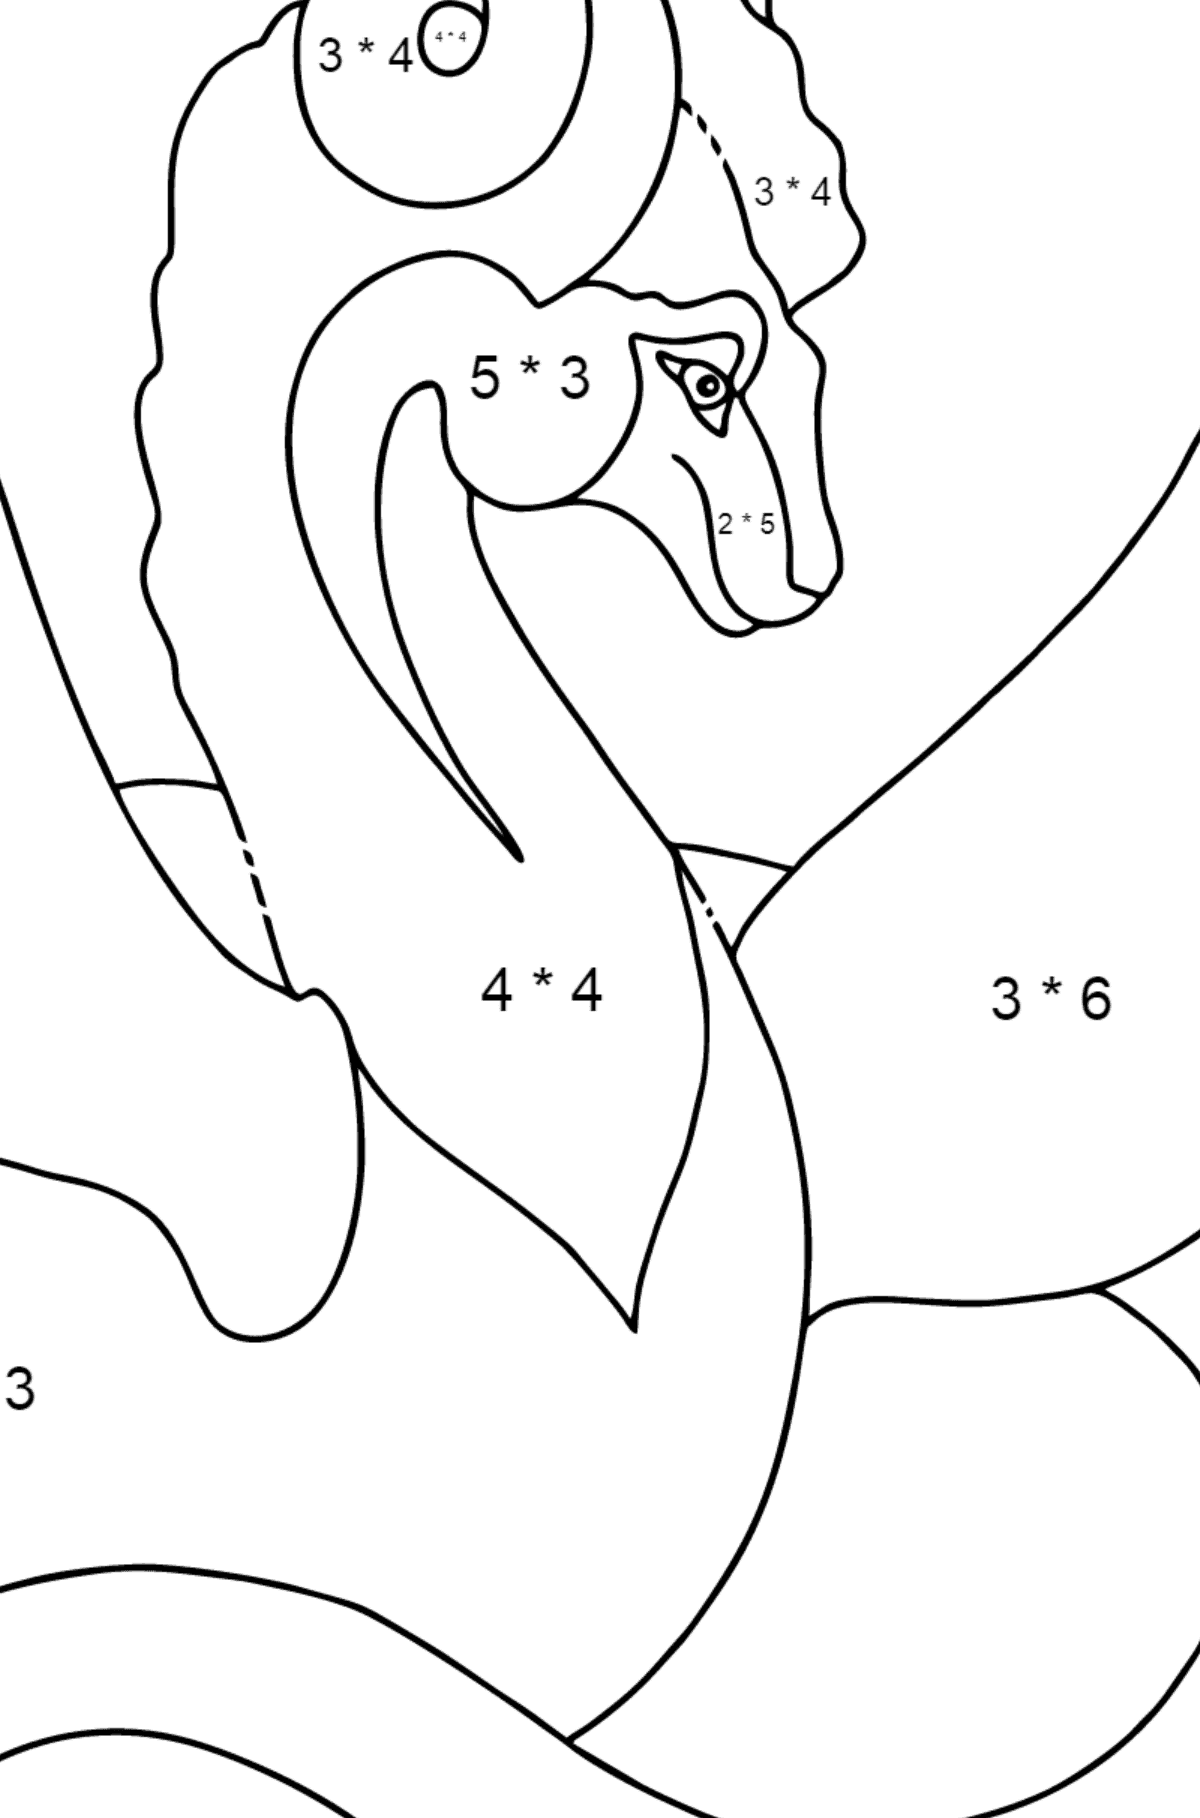 Cute Dragon Coloring Page (simple) - Math Coloring - Multiplication for Kids